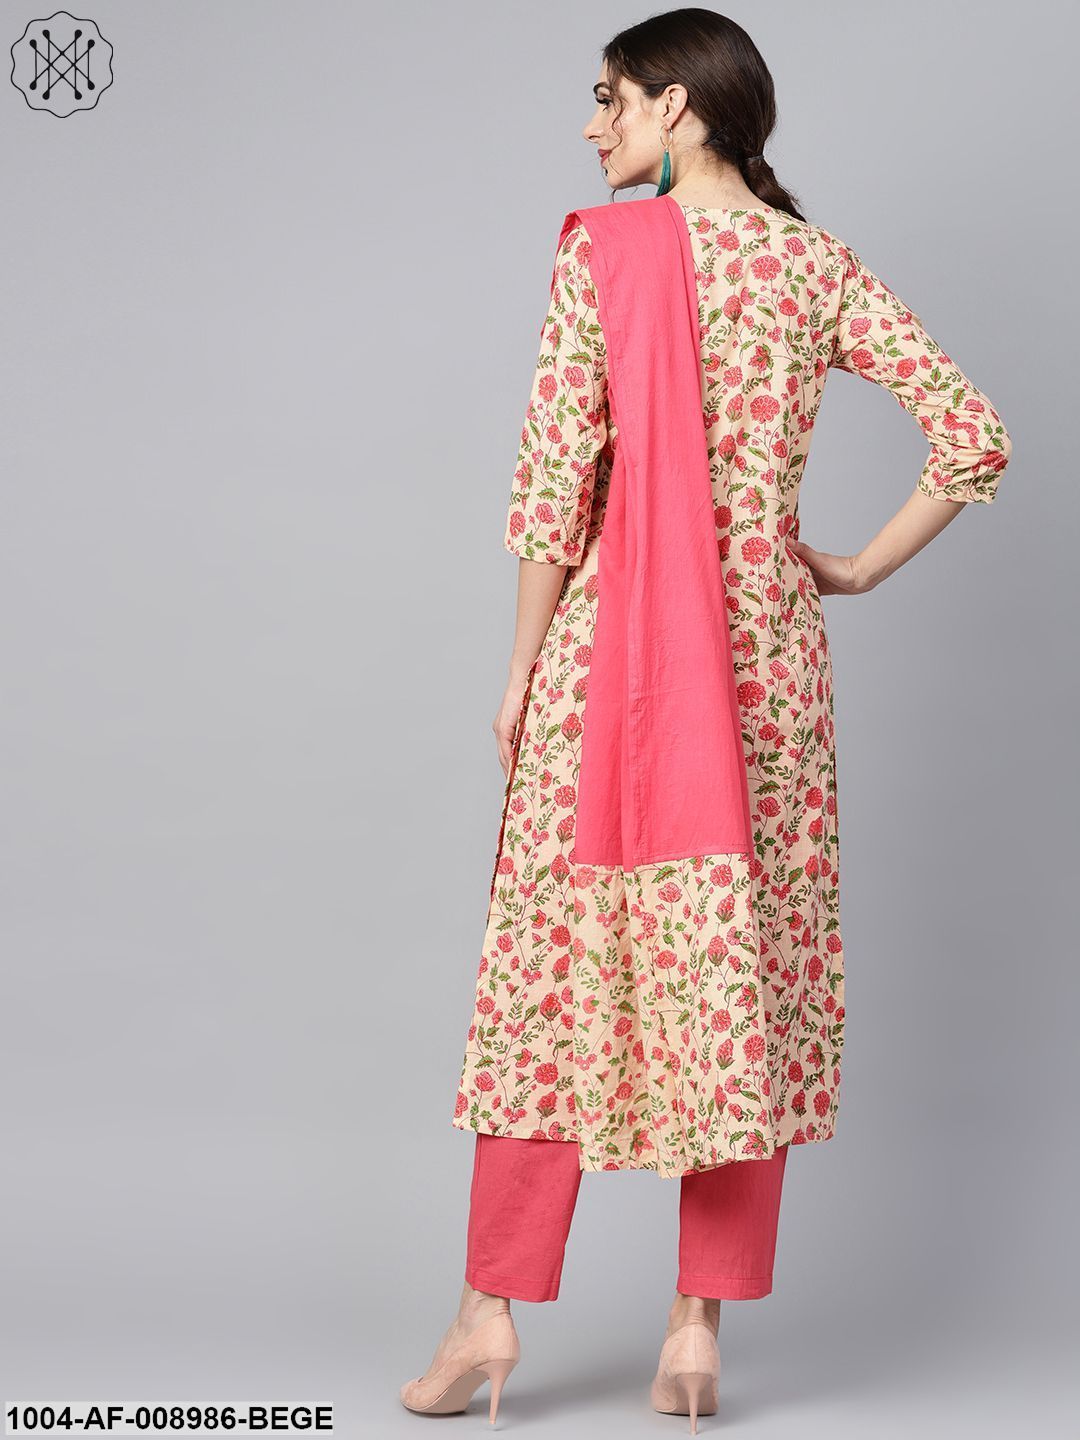 Beige Coloured Floral Printed Straight Kurta With Solid Pink Pants & Mule Dupatta